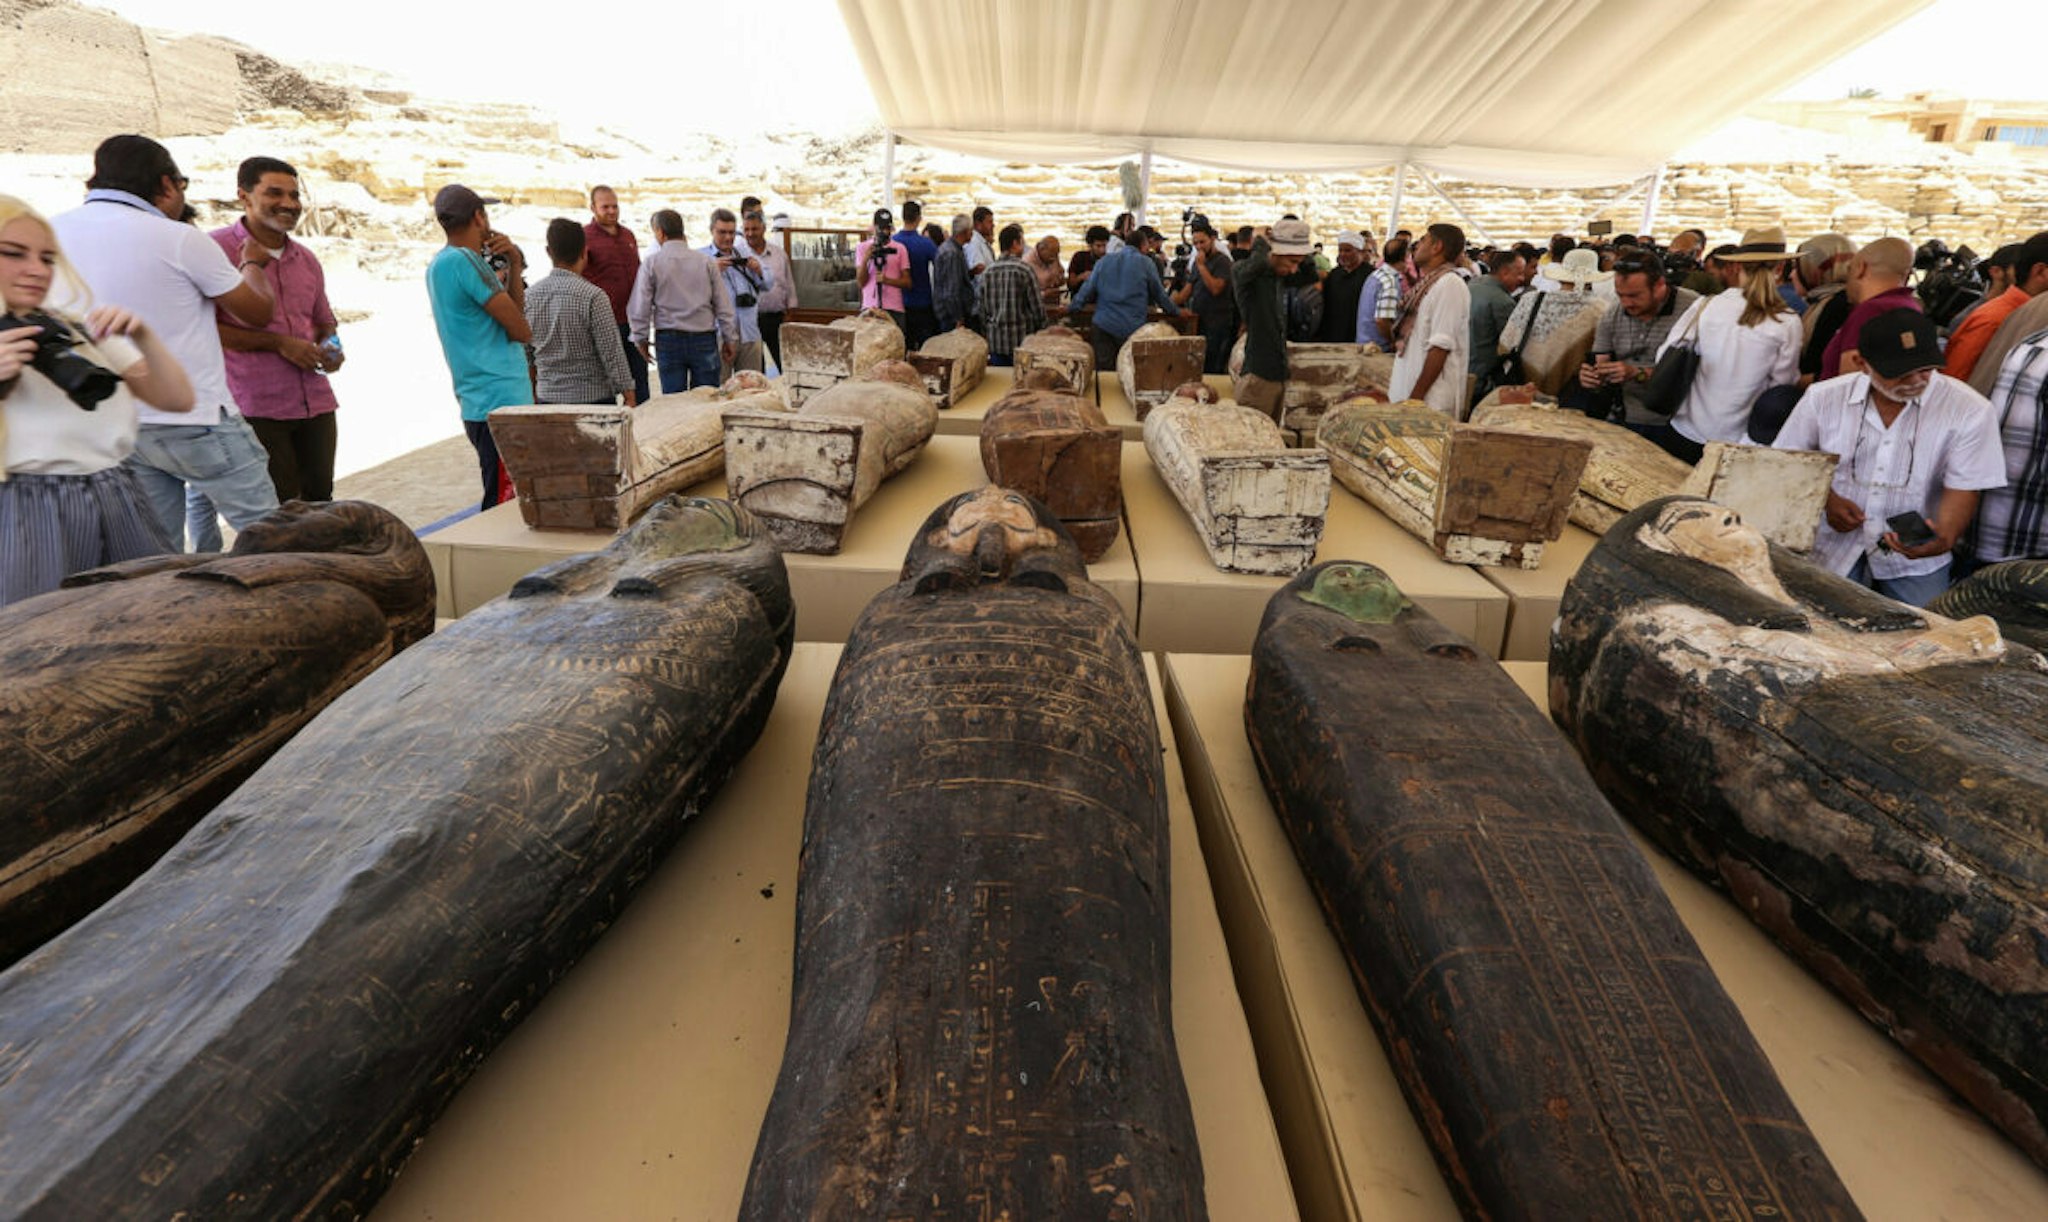 The discovery of mummy coffins dating back more than 2,500 years, which were revealed in the ancient Saqqara ring, during an official conference attended by Mustafa Al-Waziri, Secretary-General of the Supreme Council of Egyptian Antiquities, in an area on May 30, 2022 Giza Egypt